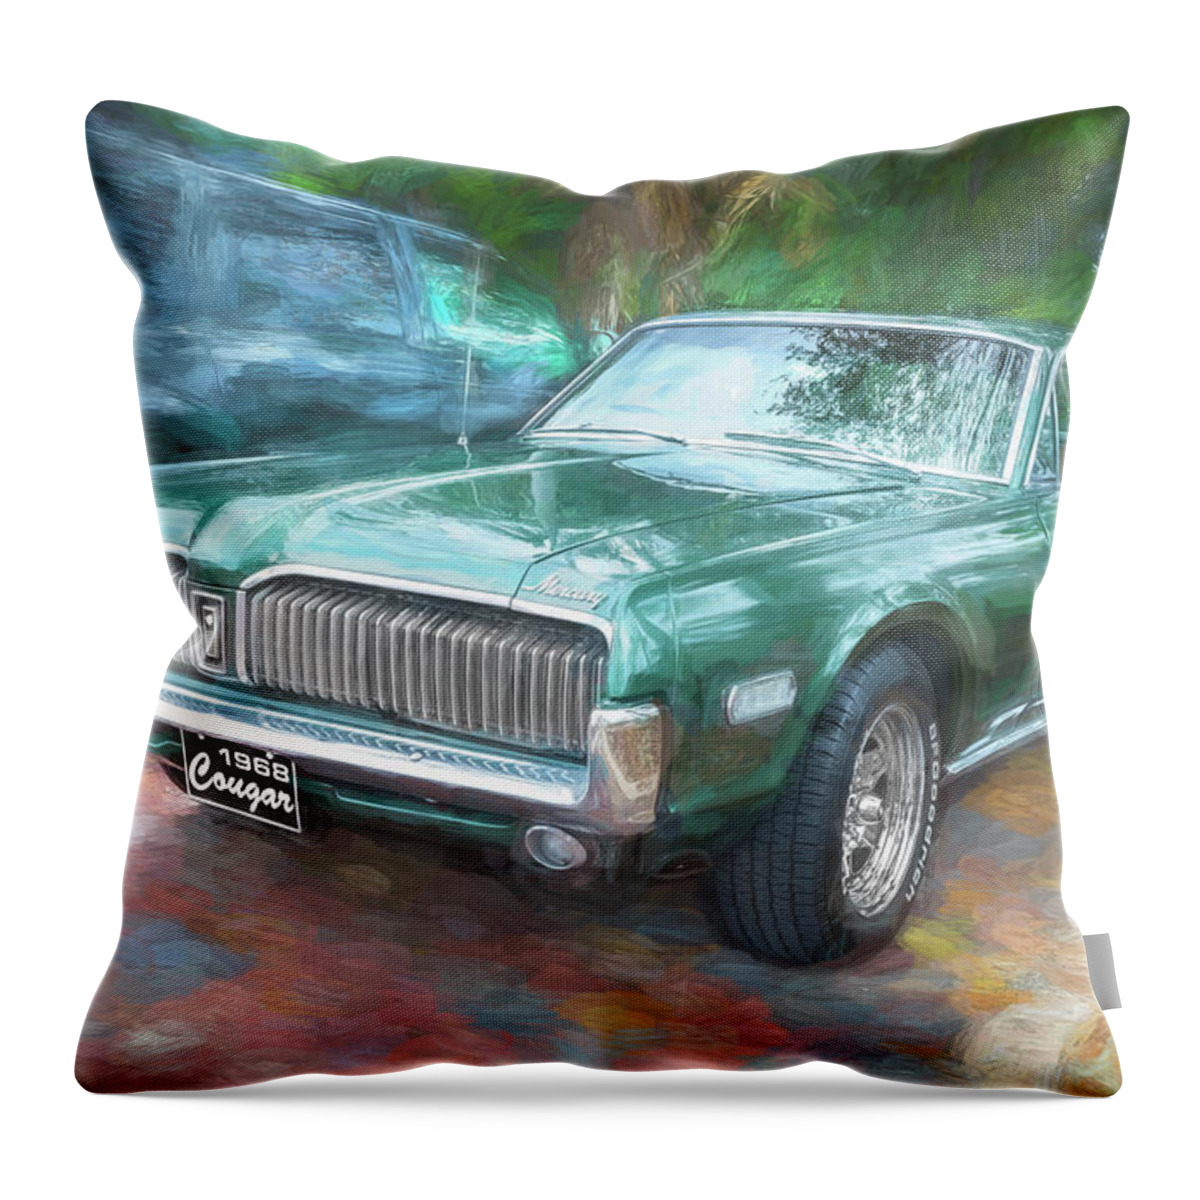 1968 Green Mercury Cougar Throw Pillow featuring the photograph 1968 Mercury Cougar X106 by Rich Franco